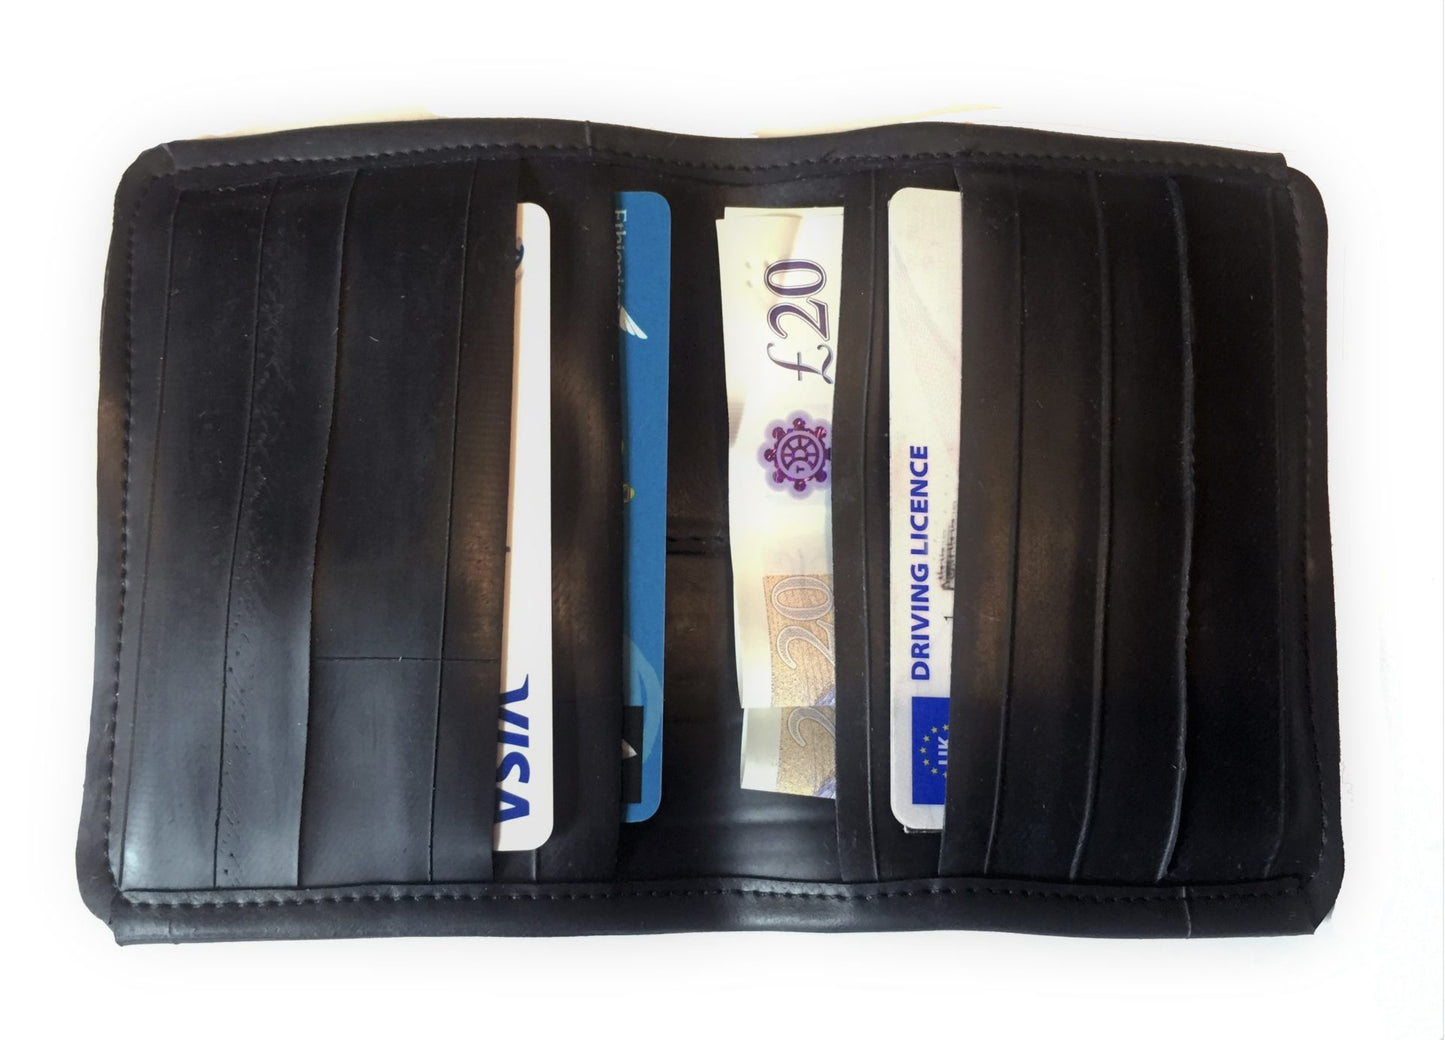 Slimline Wallet by Cycle of Good